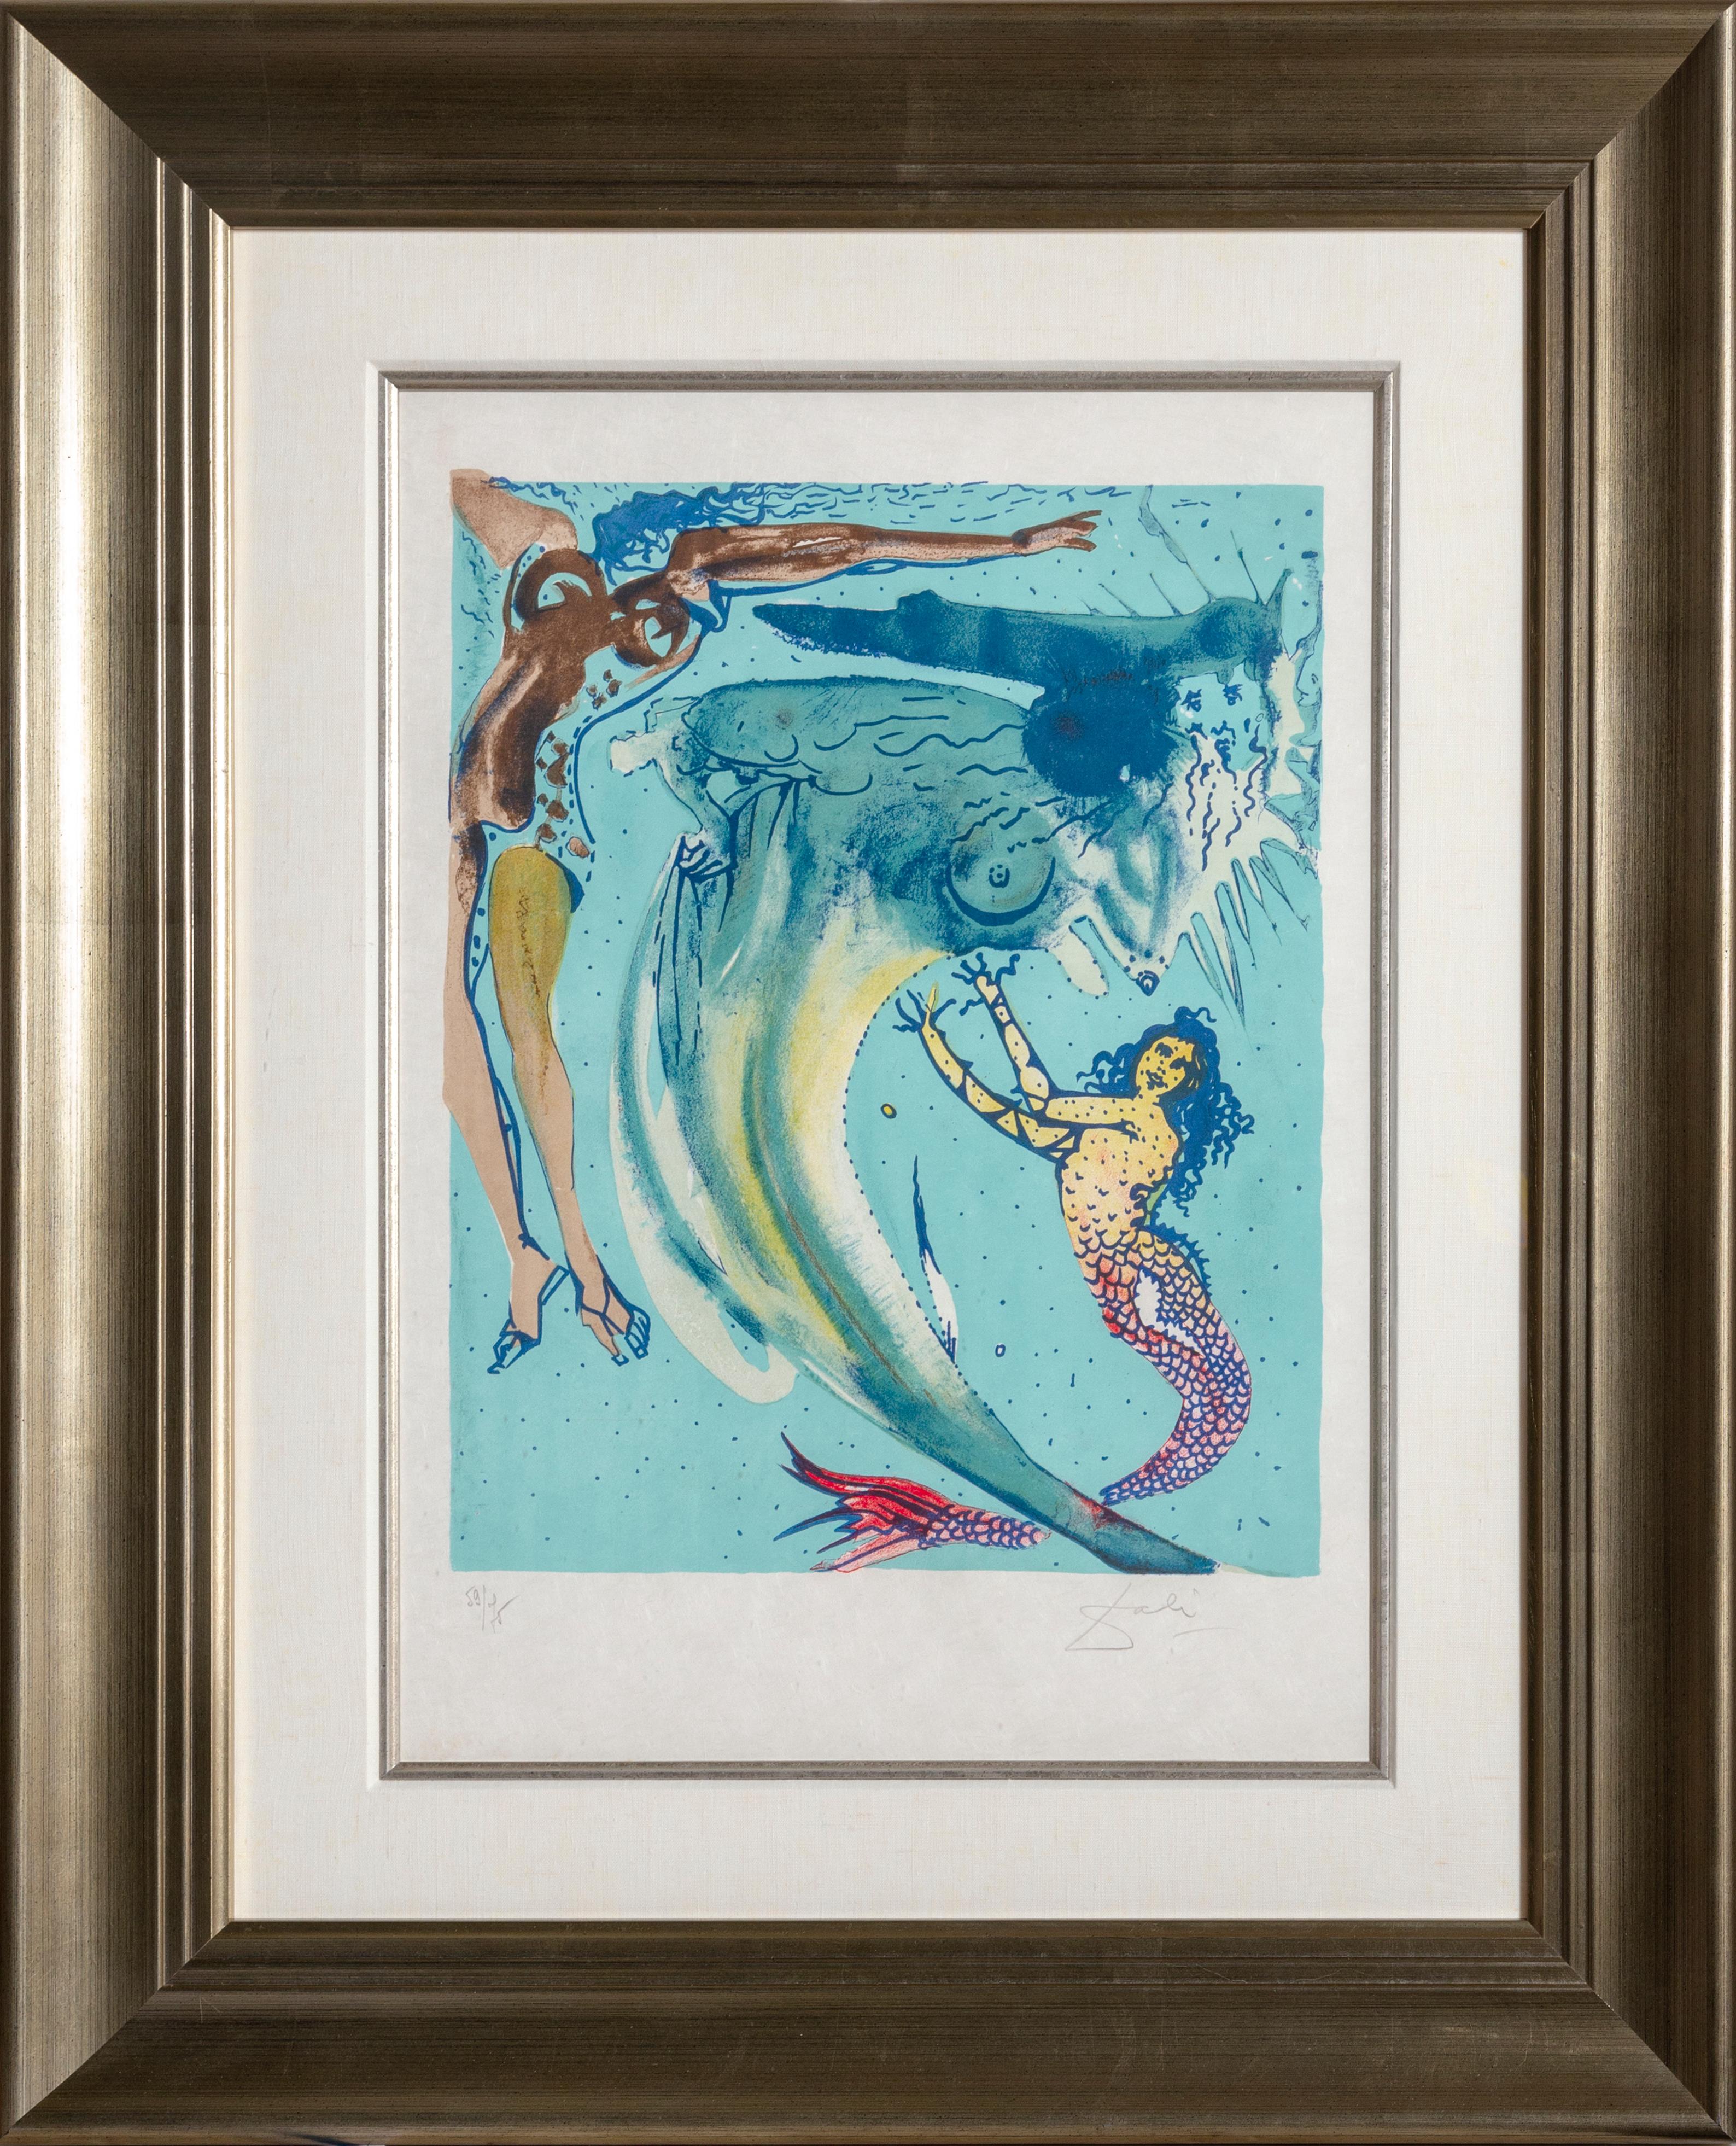 Salvador Dalí Figurative Print - The Little Mermaid, Framed Lithograph by Salvador Dali